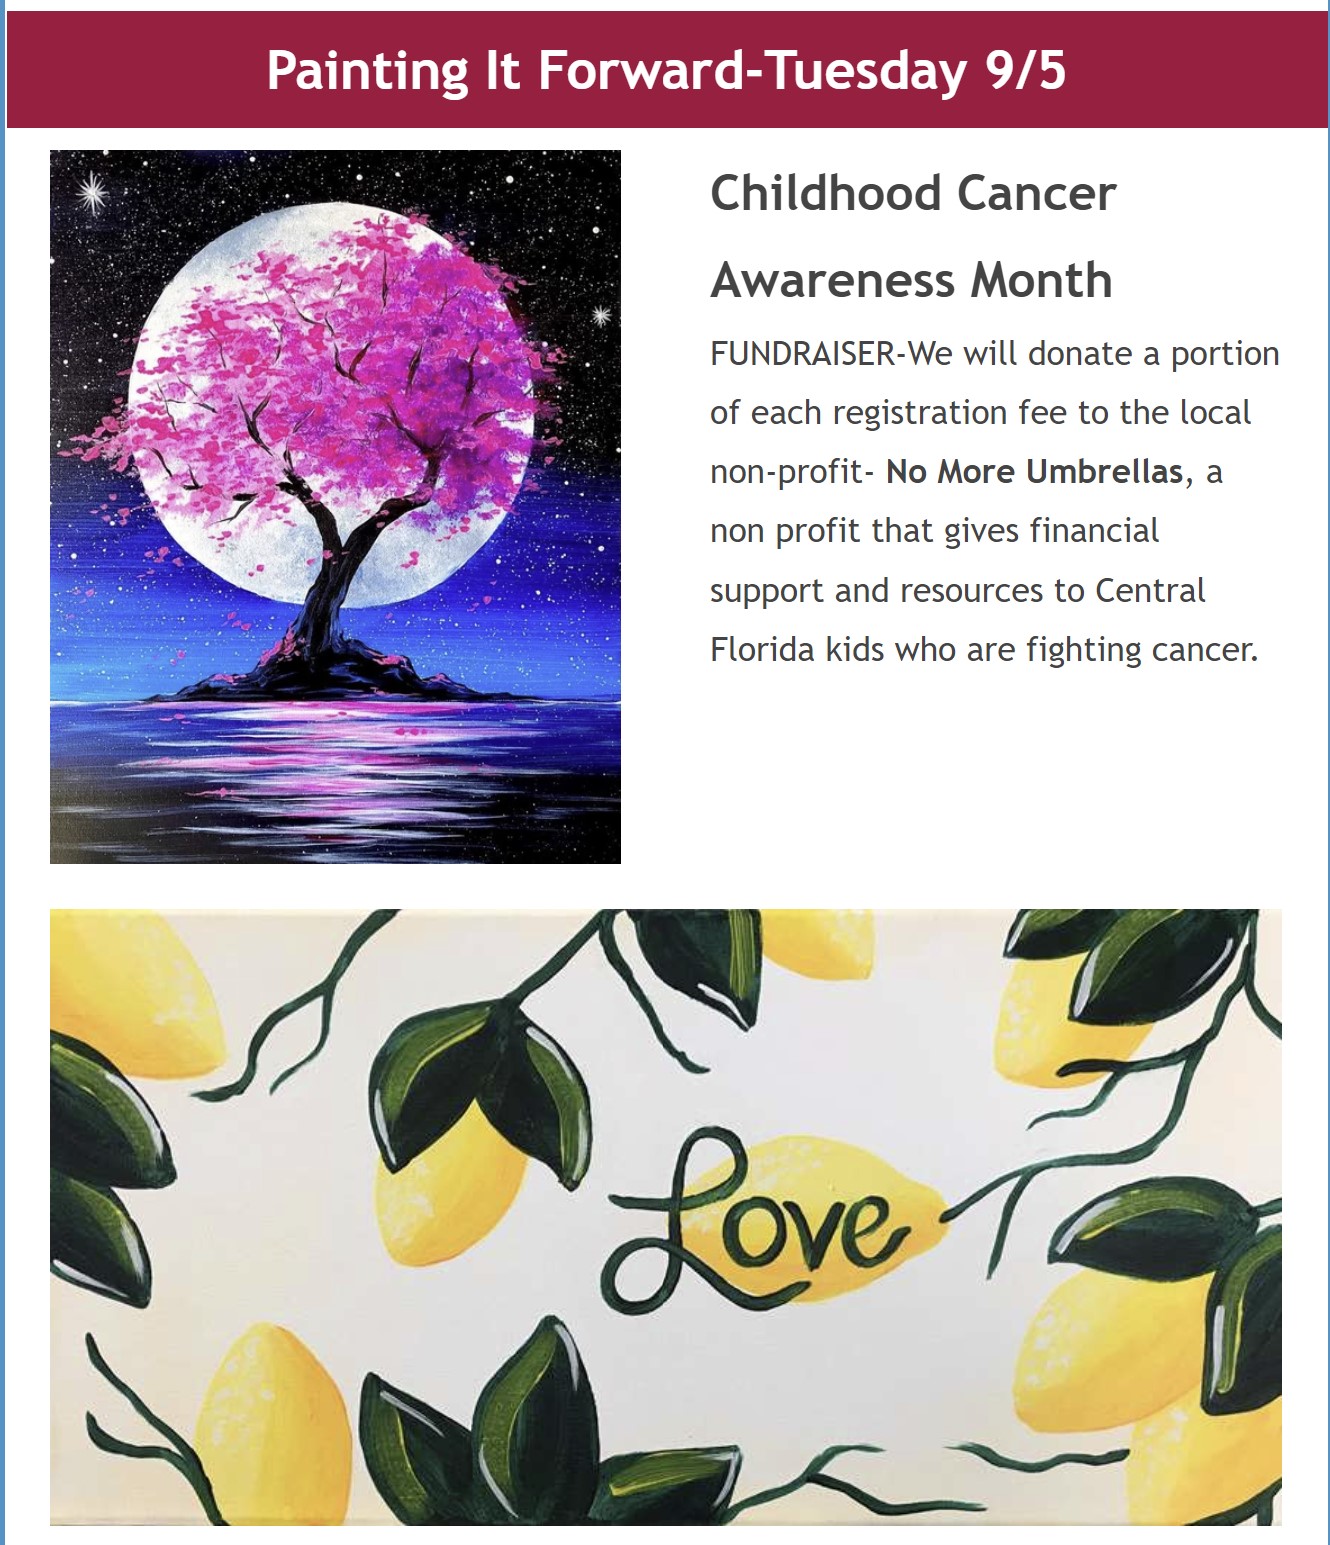 Childhood Cancer Awareness 5 Poster | Zazzle